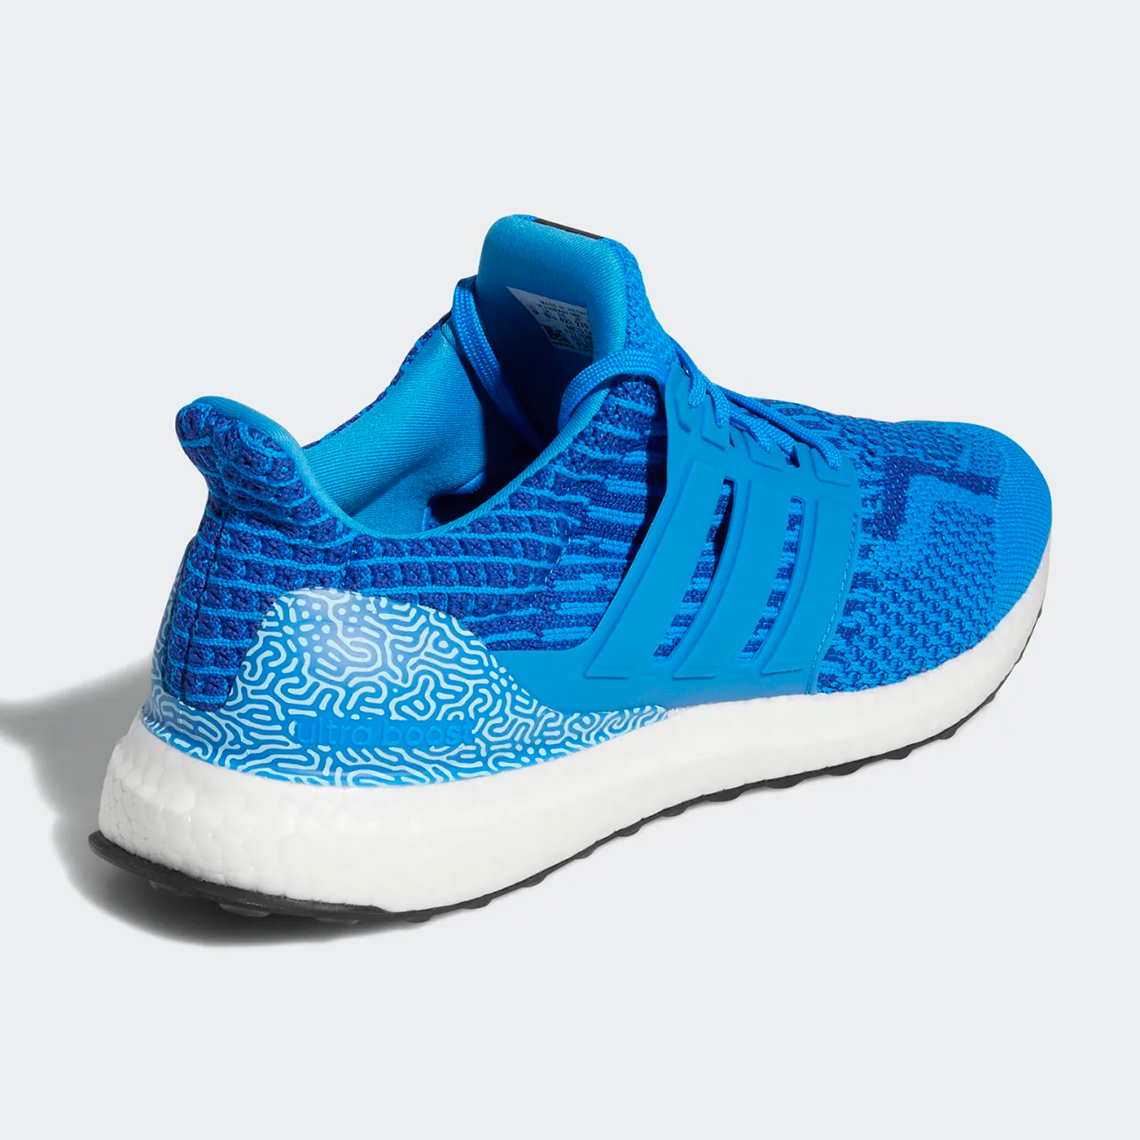 adidas ultraboost dna coral reef pack blue GV8711 2